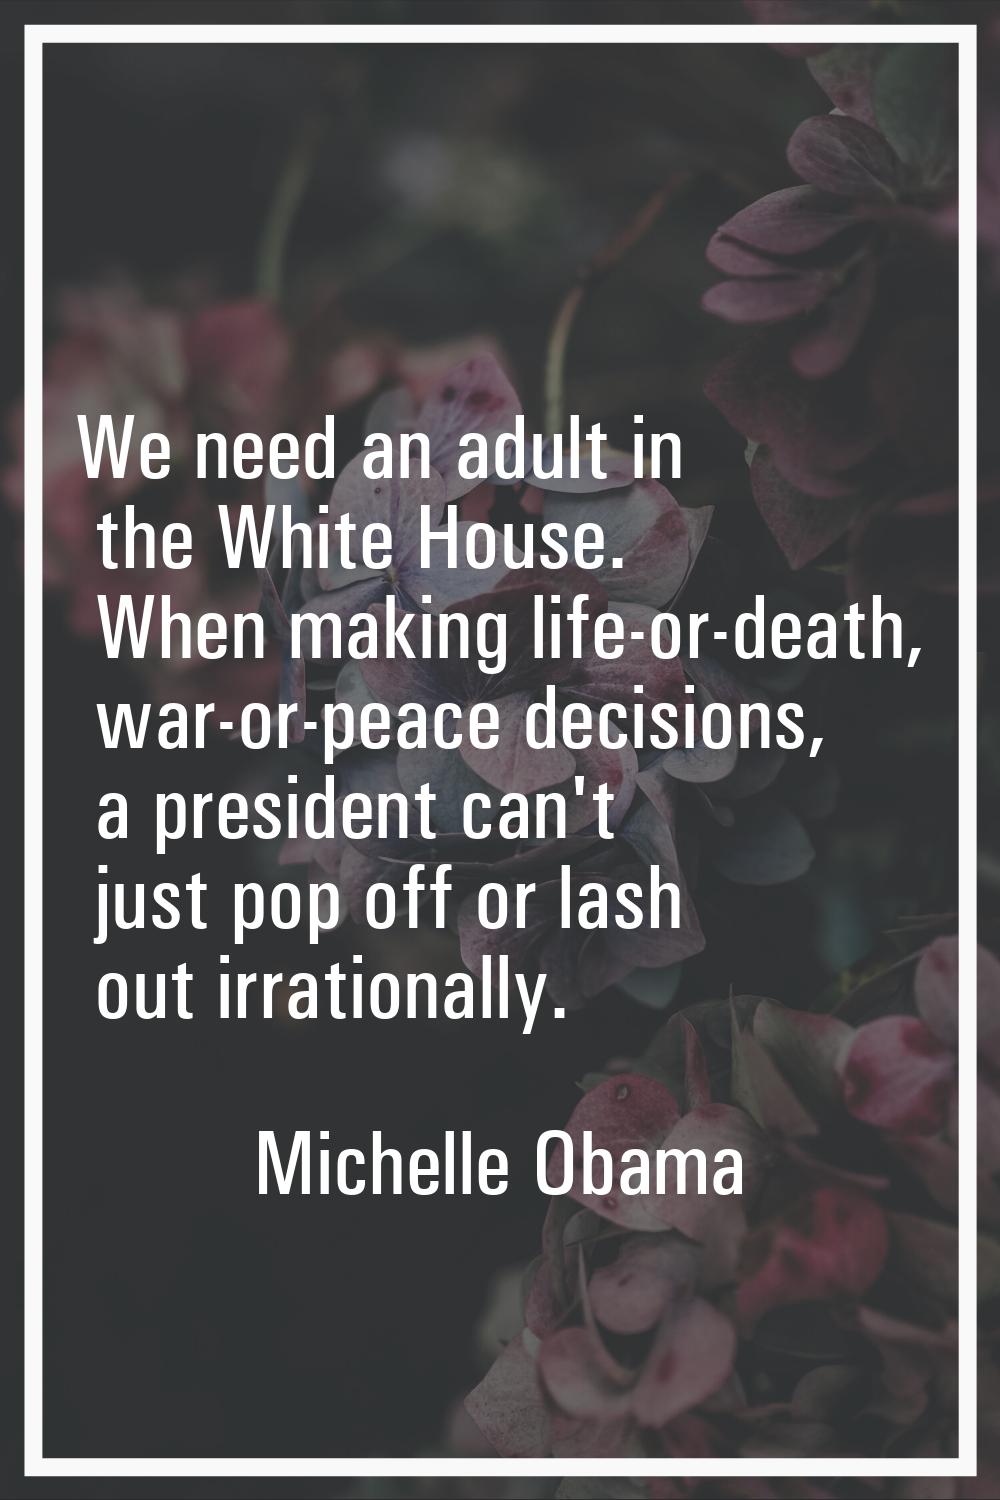 We need an adult in the White House. When making life-or-death, war-or-peace decisions, a president